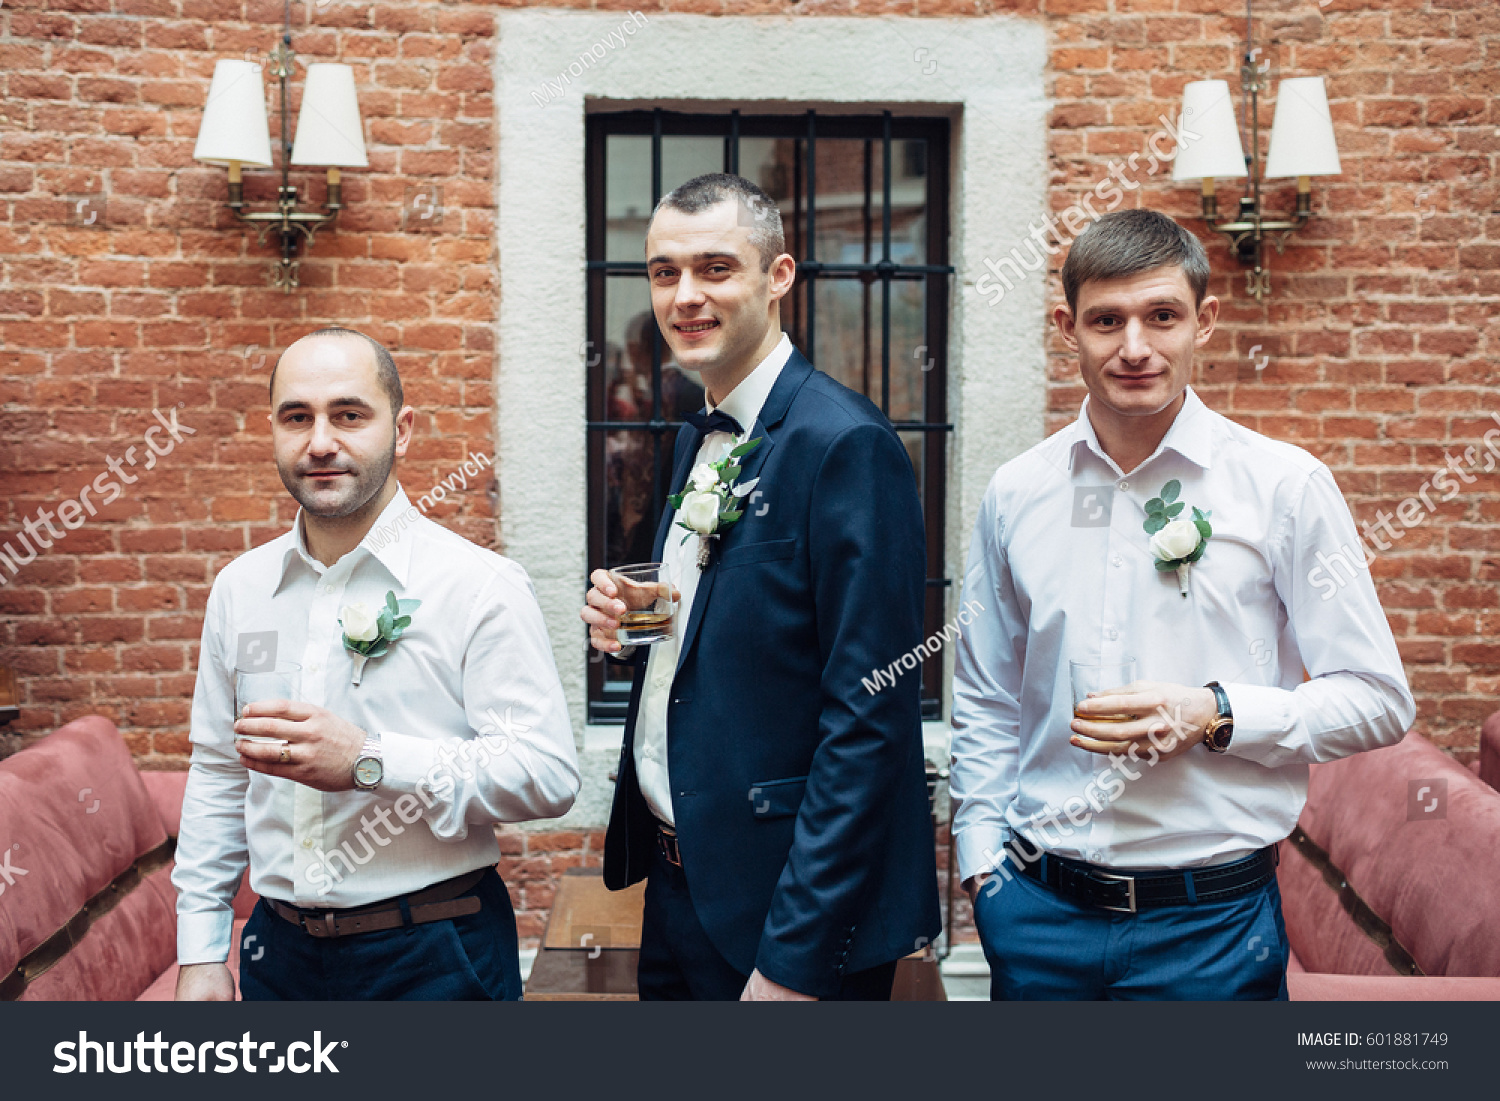 Profile of groom and groomsmen drinking whisky in brick hall #601881749